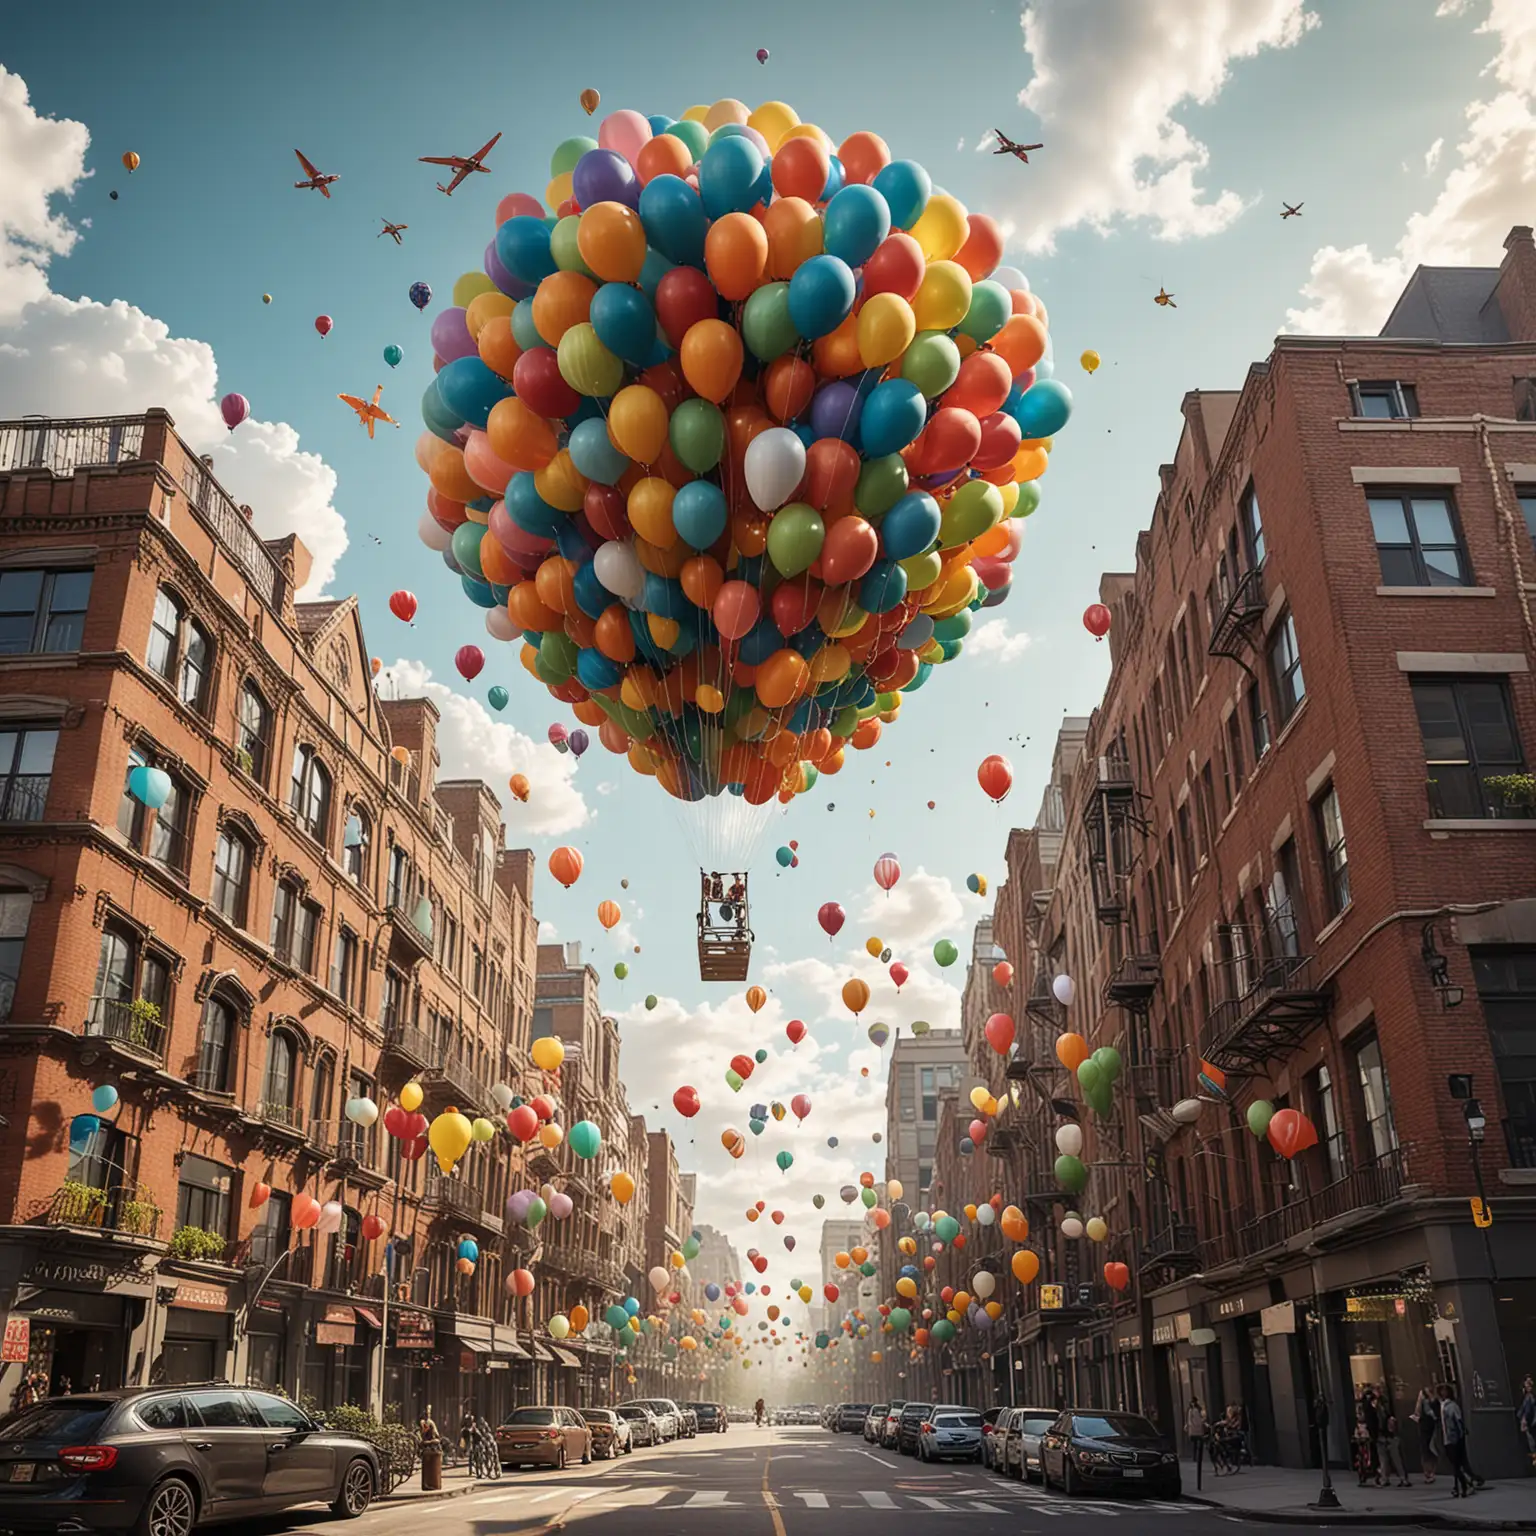 Imagine an urban renewal project by Urban Union, but with a whimsical twist. Create a stunning, high-resolution image of a cityscape where each building is creatively lifted into the sky by an array of colorful hot air balloons. Visualize a bustling, floating neighborhood above the clouds, with green spaces, outdoor cafes, and playgrounds all suspended by a cluster of cheerful balloons. The architecture should be modern and eco-friendly, reflecting sunlight off solar panels. Add playful details like residents using ladders to move between levels, and children sending paper airplanes gliding from balcony to balcony, showcasing a lively and elevated urban life
